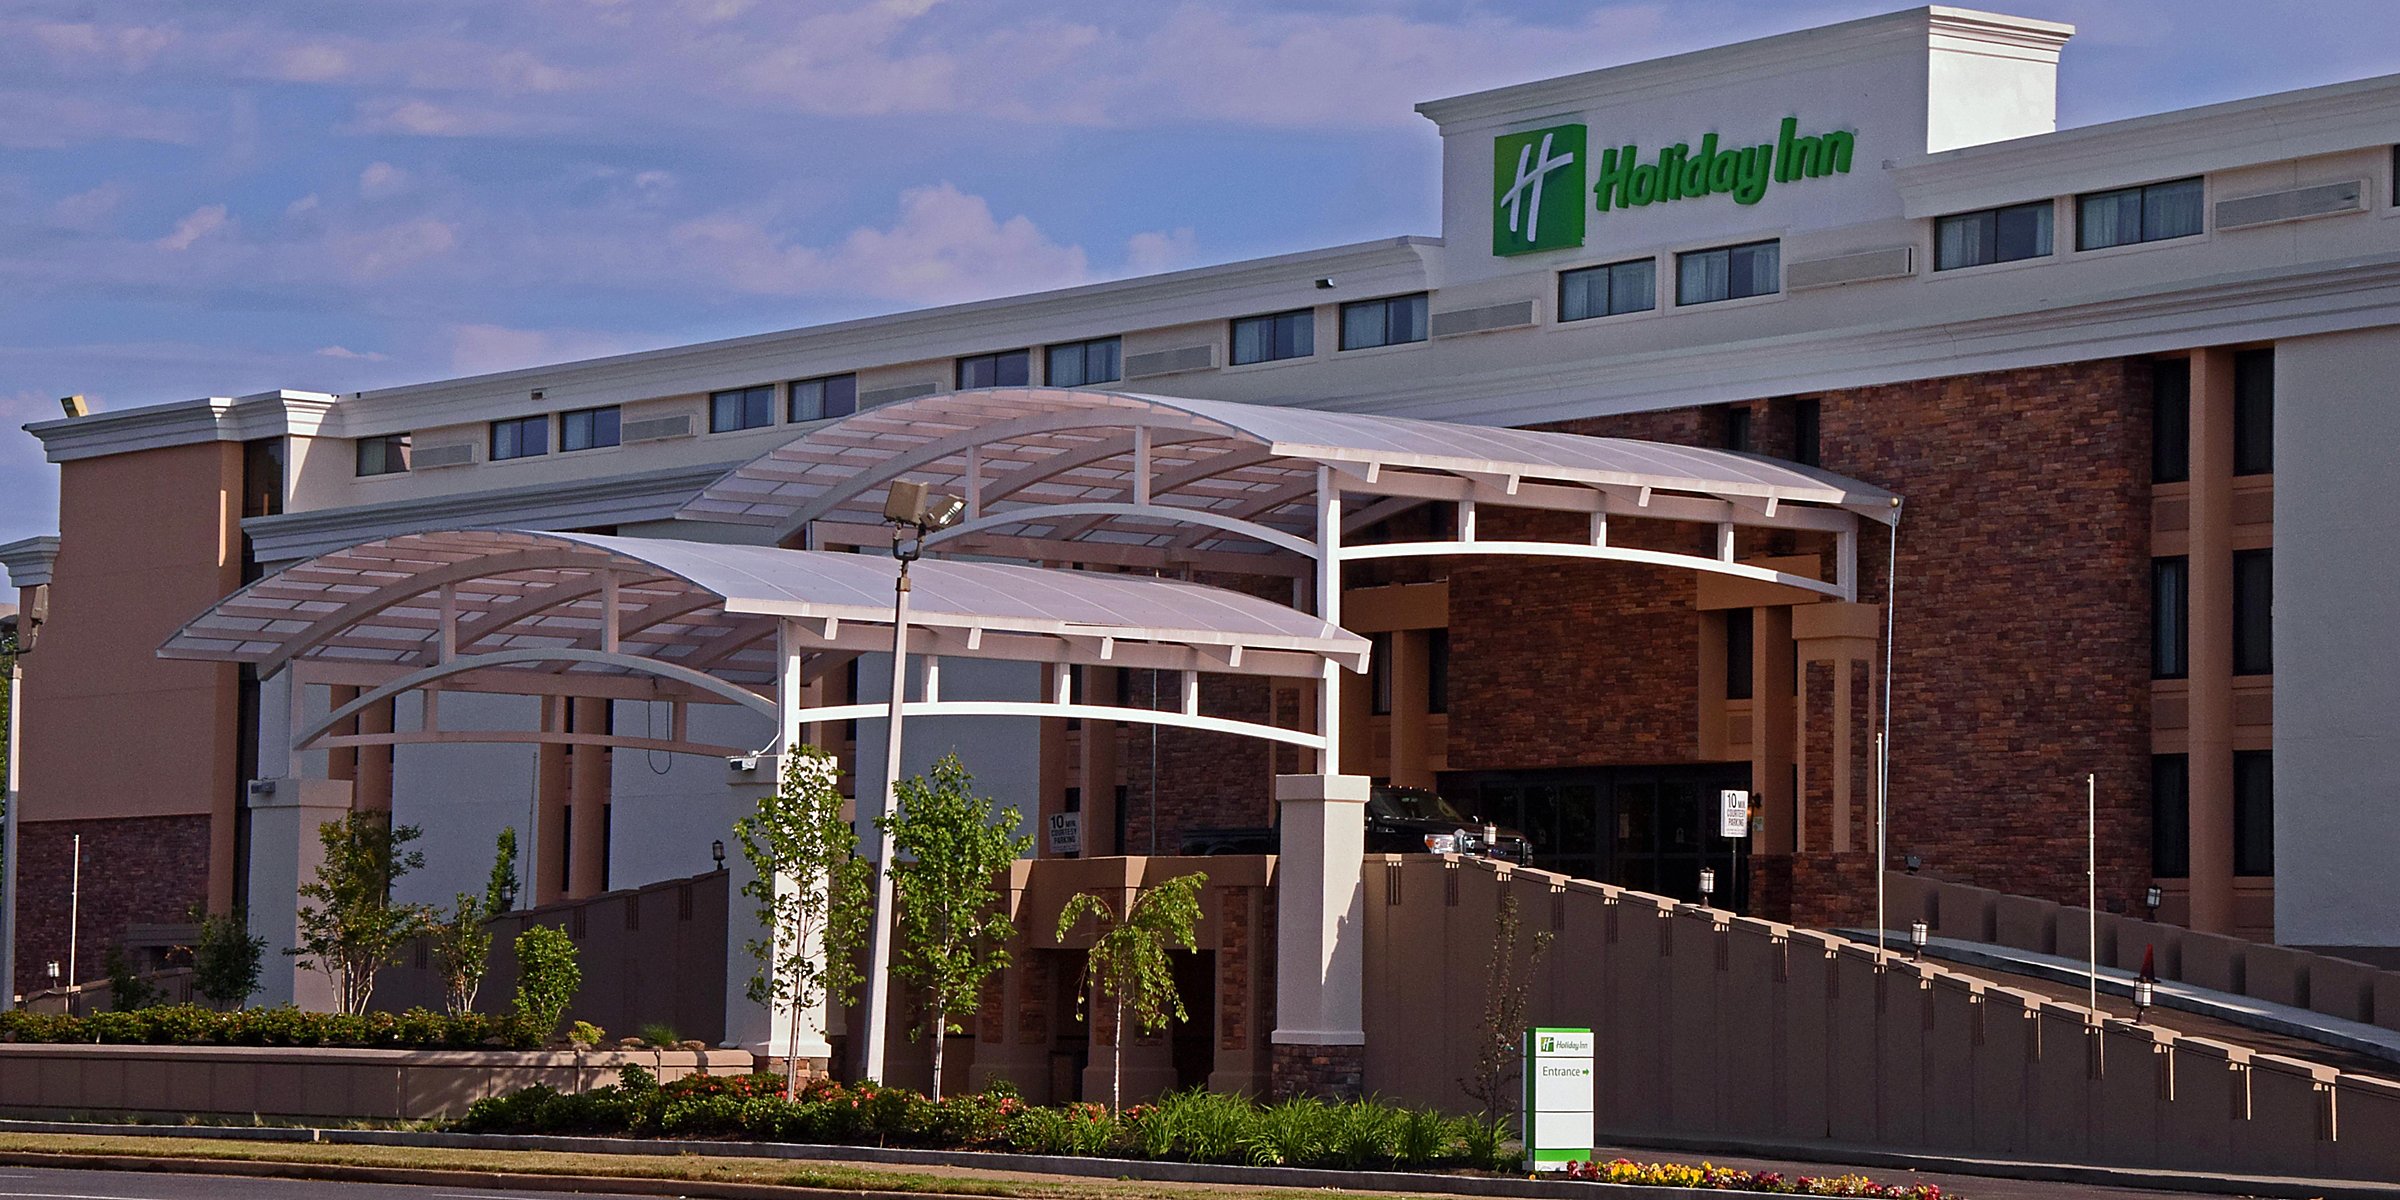 Discount [80% Off] Holiday Inn Memphis Airport Conference Center United States | Hotel Room ...